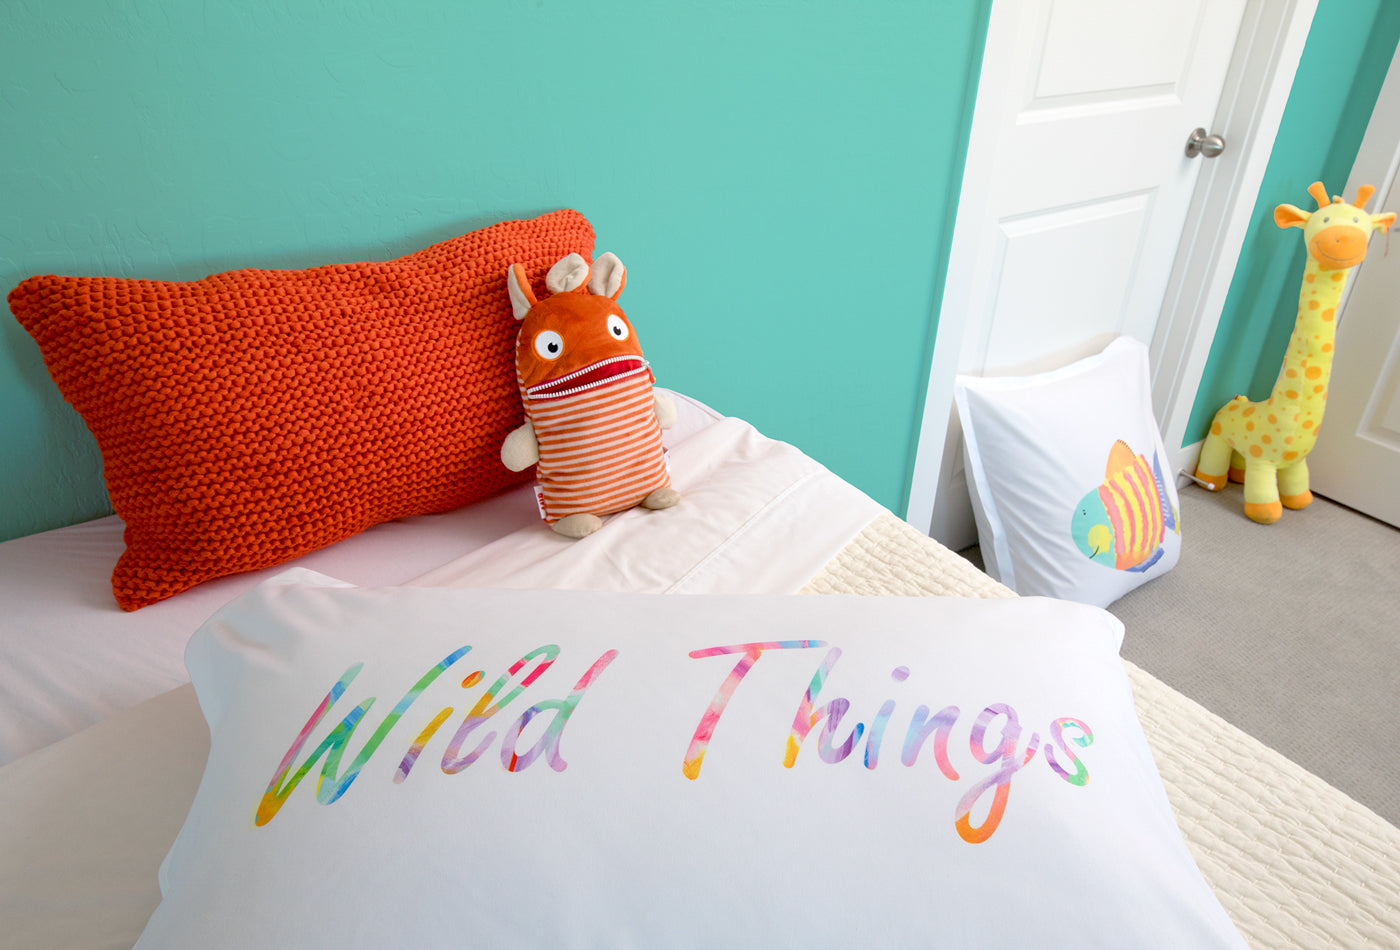 Wild Things - Inspirational Quotes Pillowcase Collection-Di Lewis